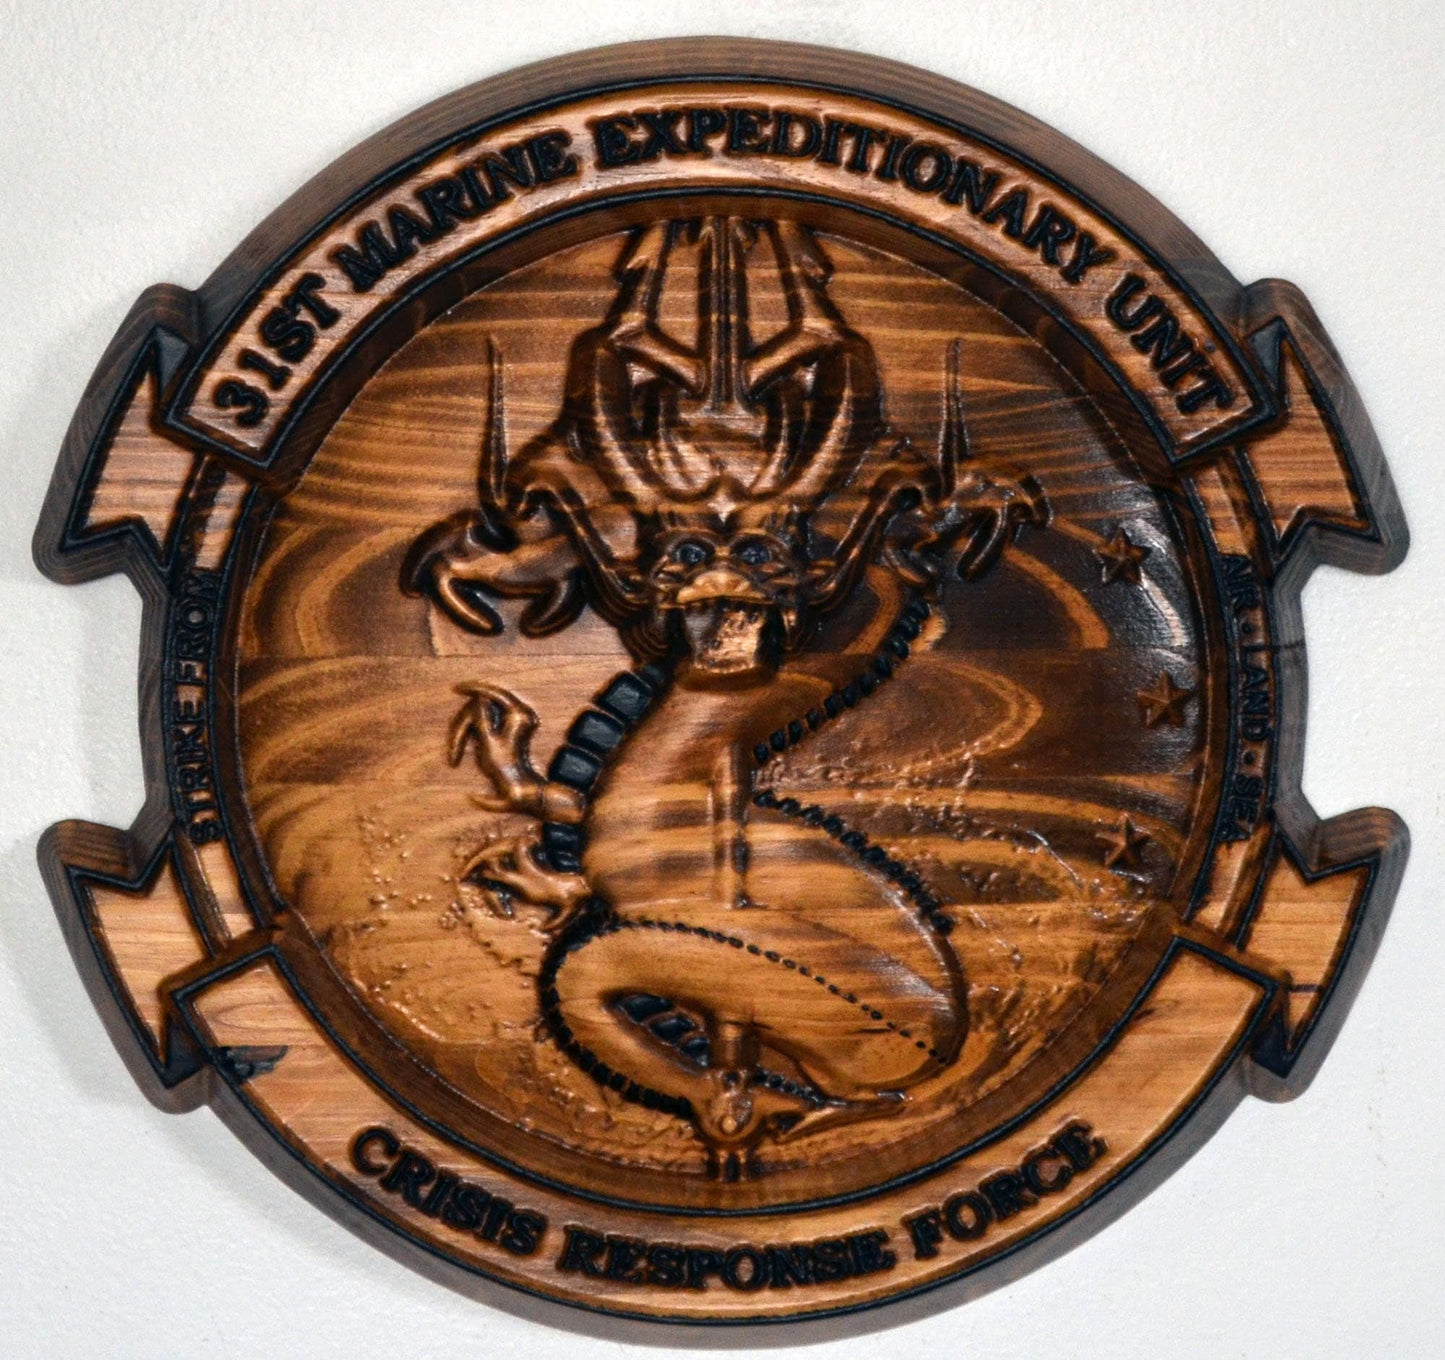 USMC 31st Marine Expeditionary Unit, stained 3d wood carving, military plaque